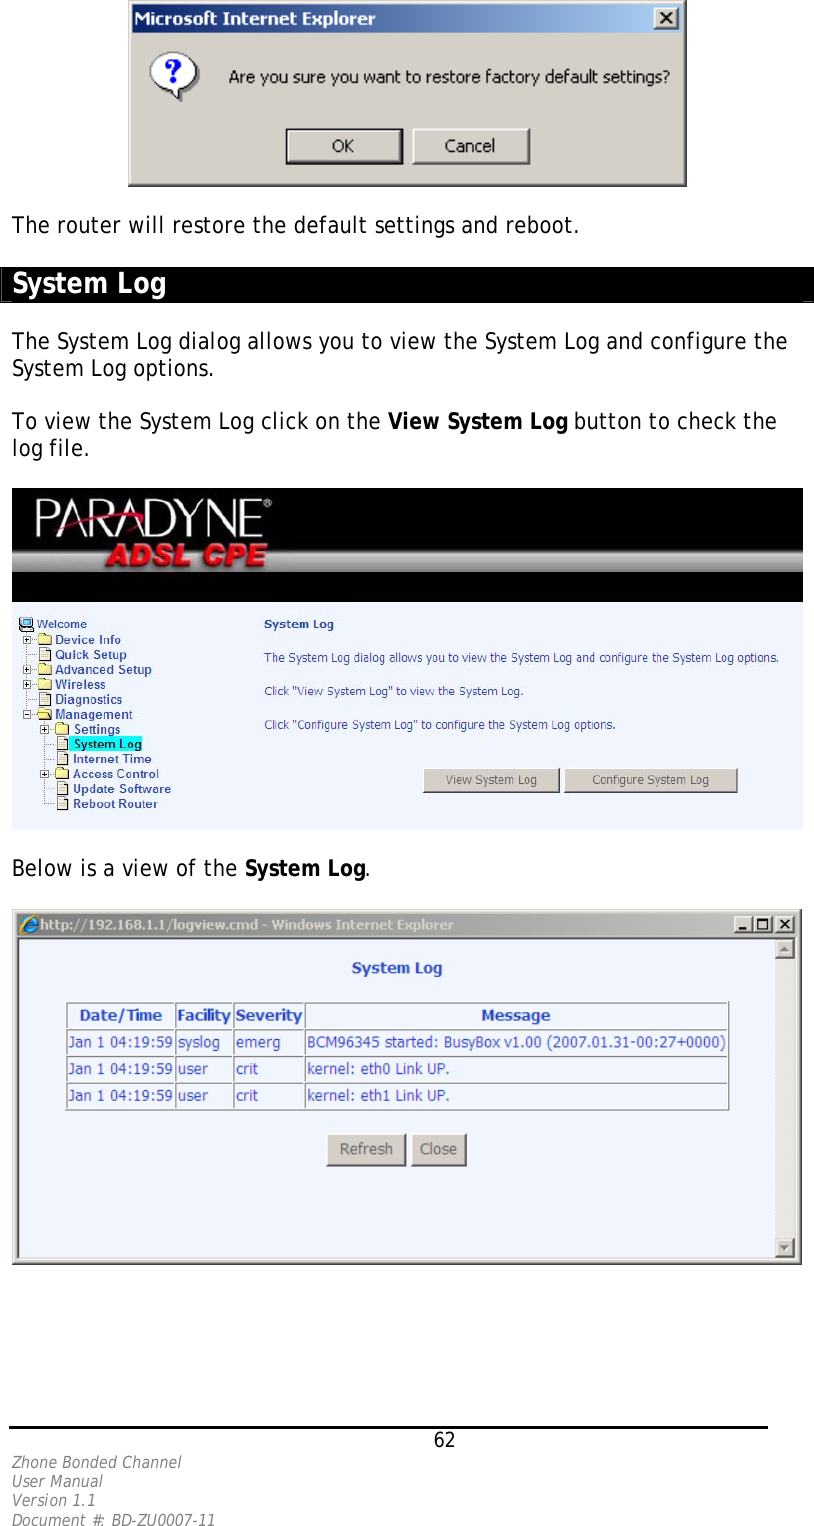   The router will restore the default settings and reboot.  System Log   The System Log dialog allows you to view the System Log and configure the System Log options.   To view the System Log click on the View System Log button to check the log file.     Below is a view of the System Log.      62 Zhone Bonded Channel User Manual  Version 1.1 Document #: BD-ZU0007-11 